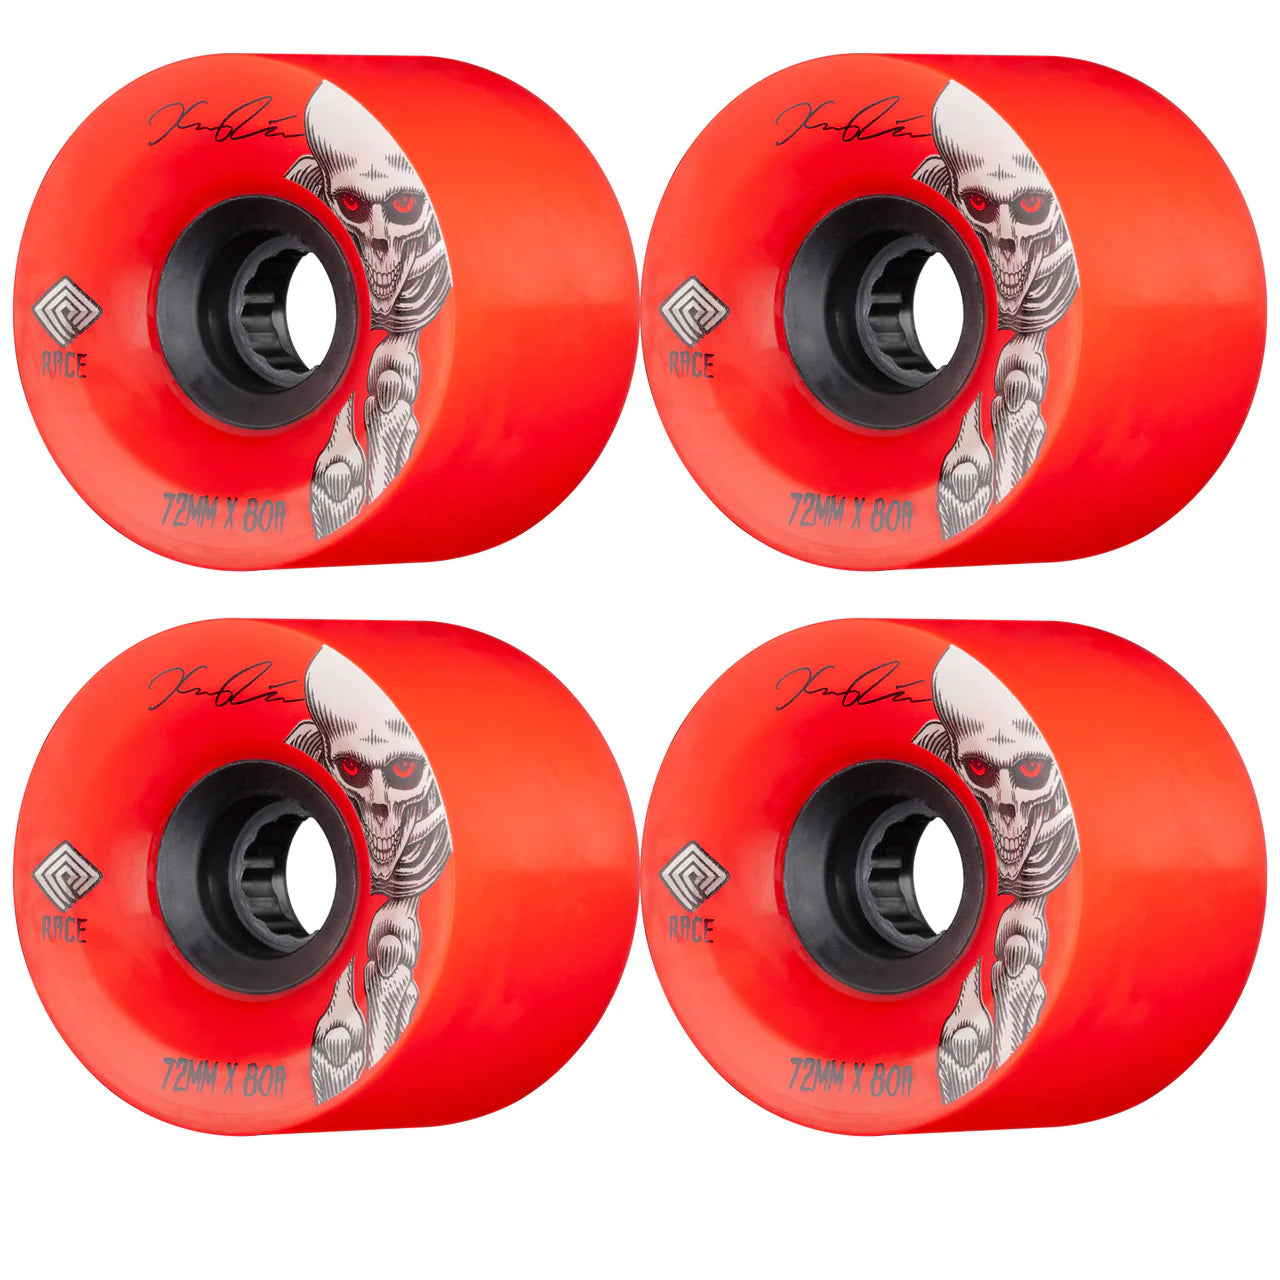 POWELL PERALTA KEVIN REIMER DOWNHILL 80A WHEEL 72MM